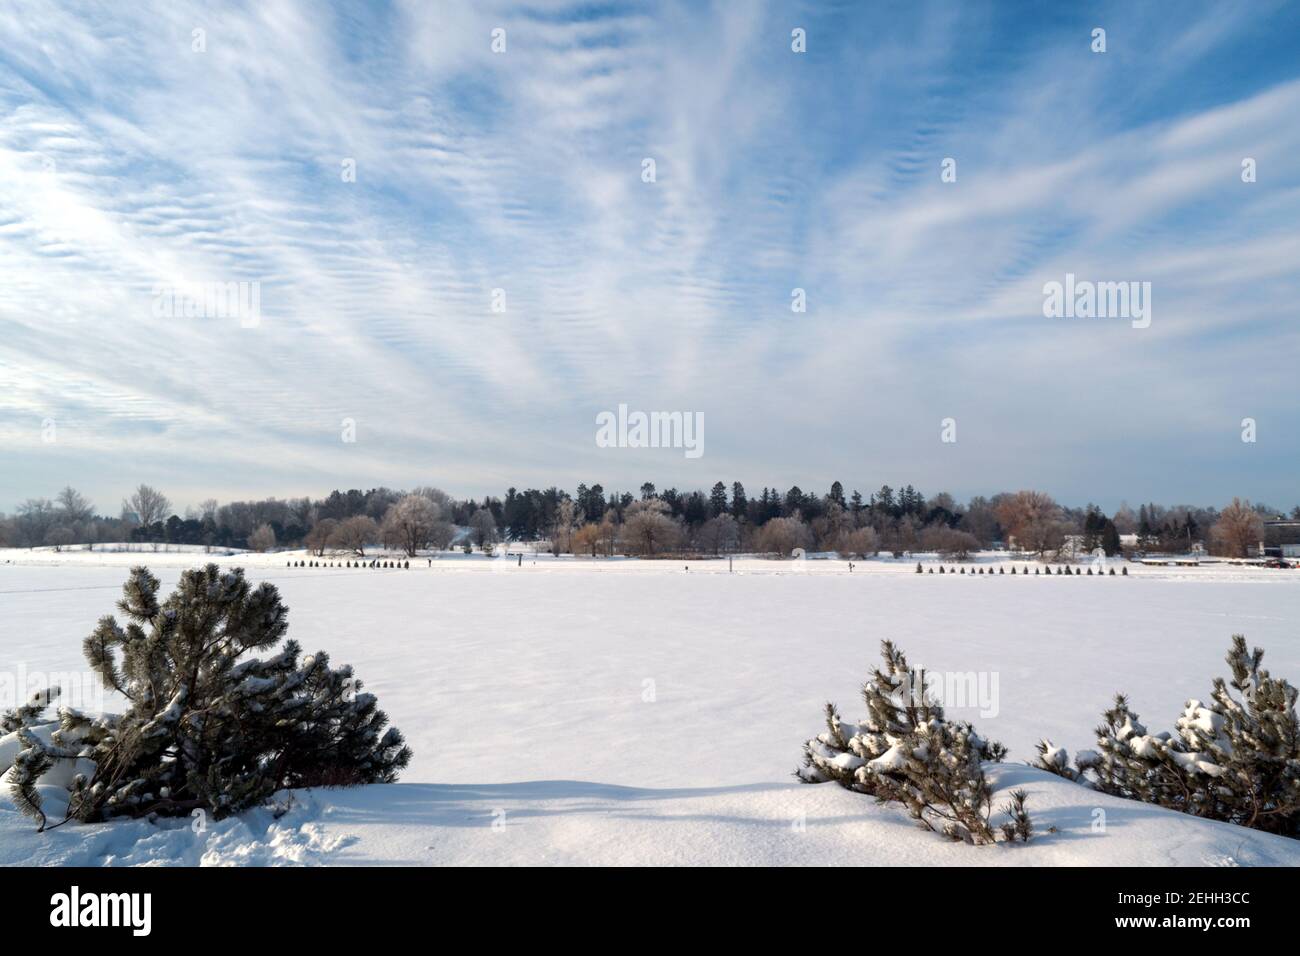 Life in a cold city - winter scene from Ottawa - beautiful morning cloud and snow landscape at Dow's Lake. Ontario, Canada. Stock Photo